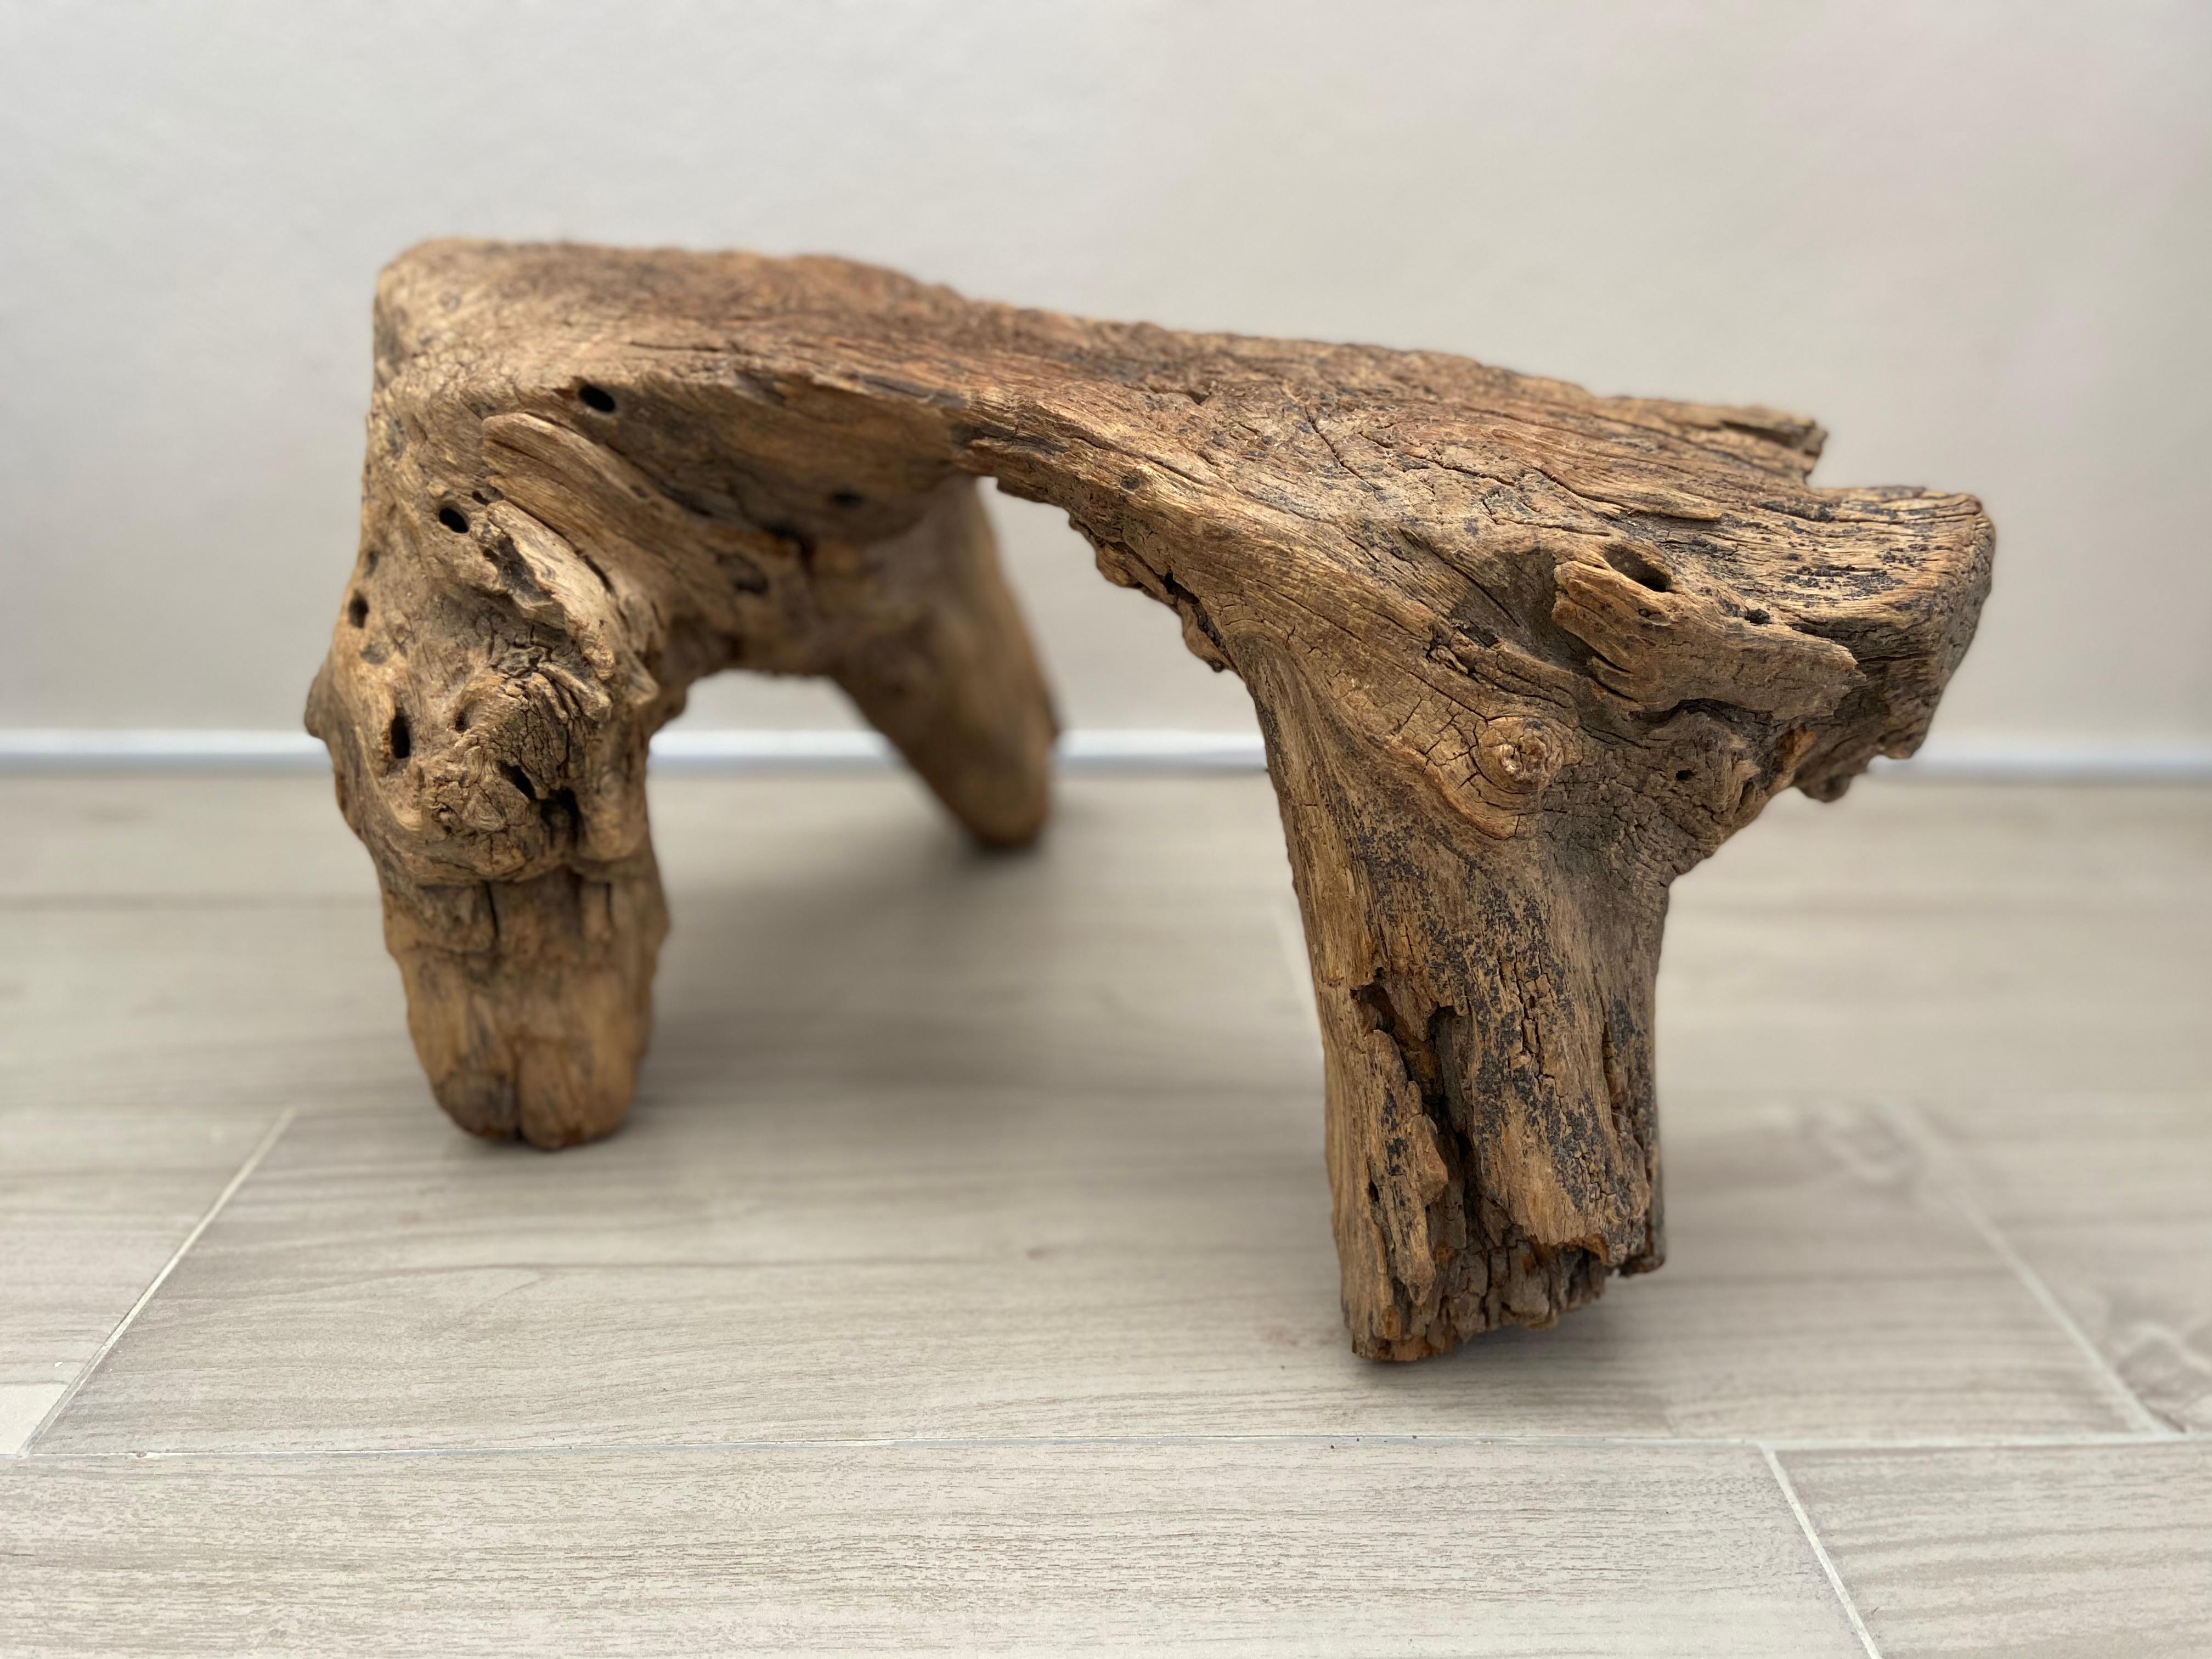 Hand-Carved Rustic Stool from Mexico, Late 19th Century